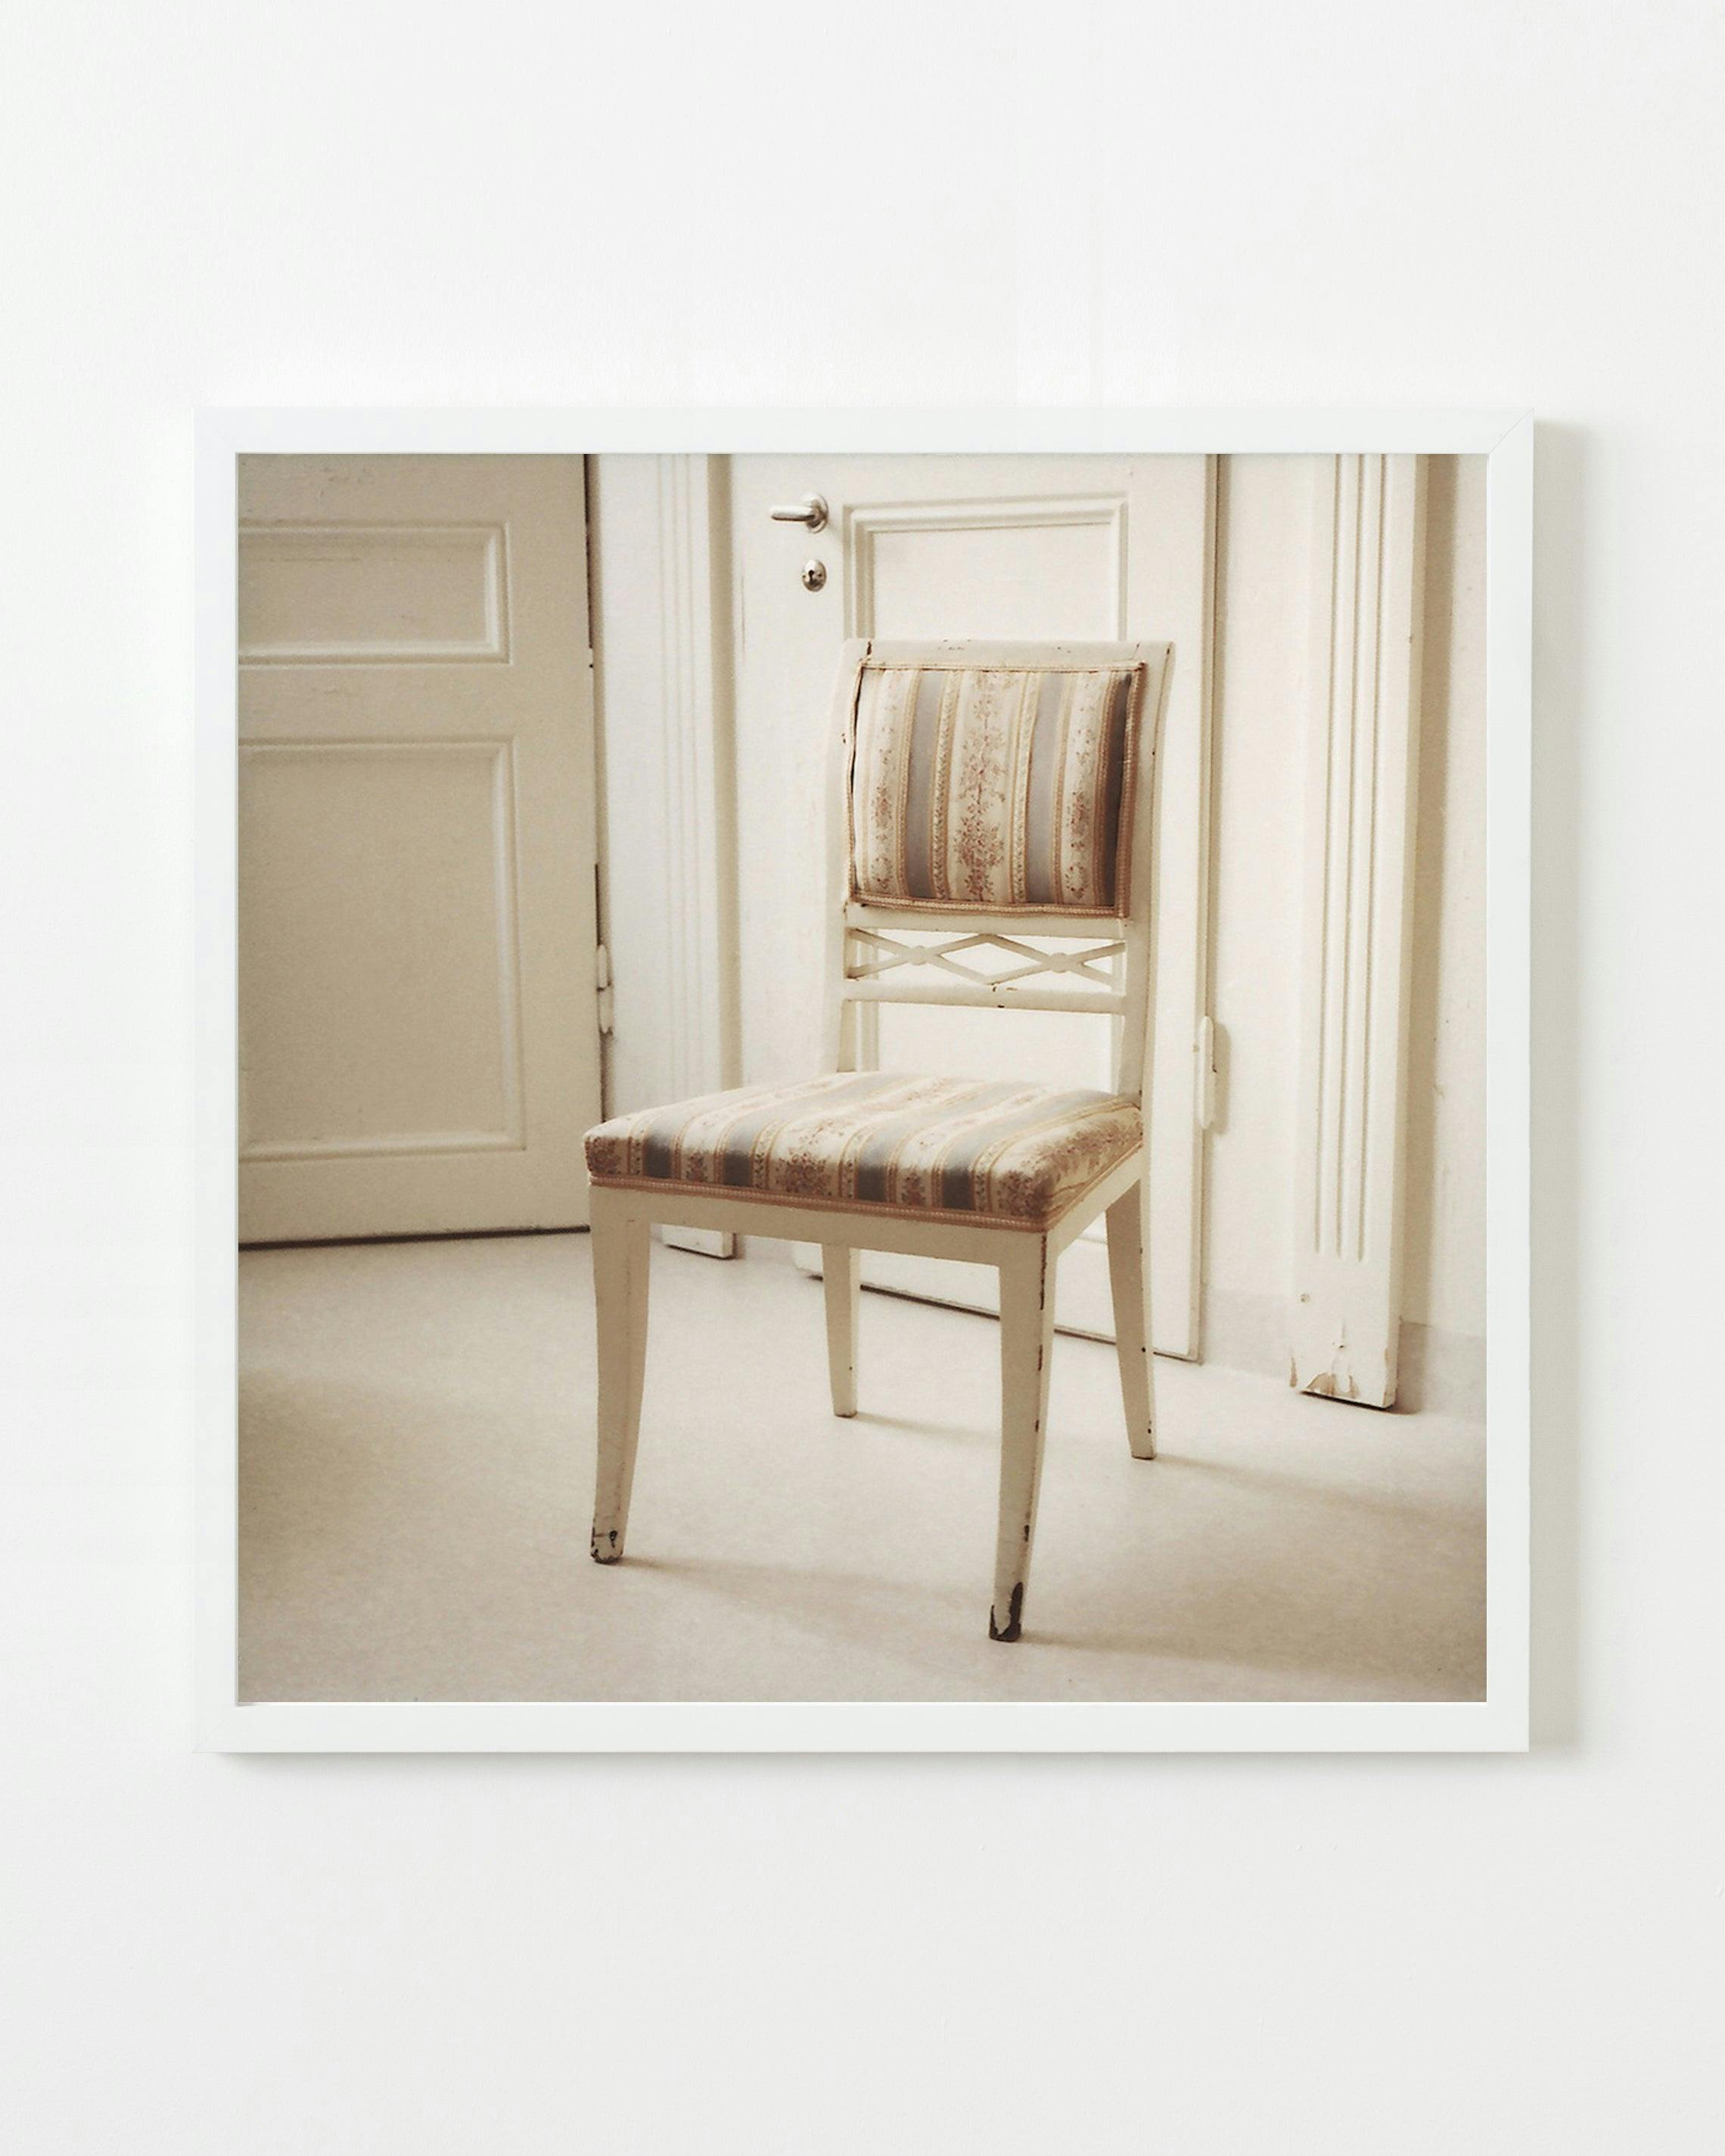 Photography by Anna Moller titled "Silk Chair".